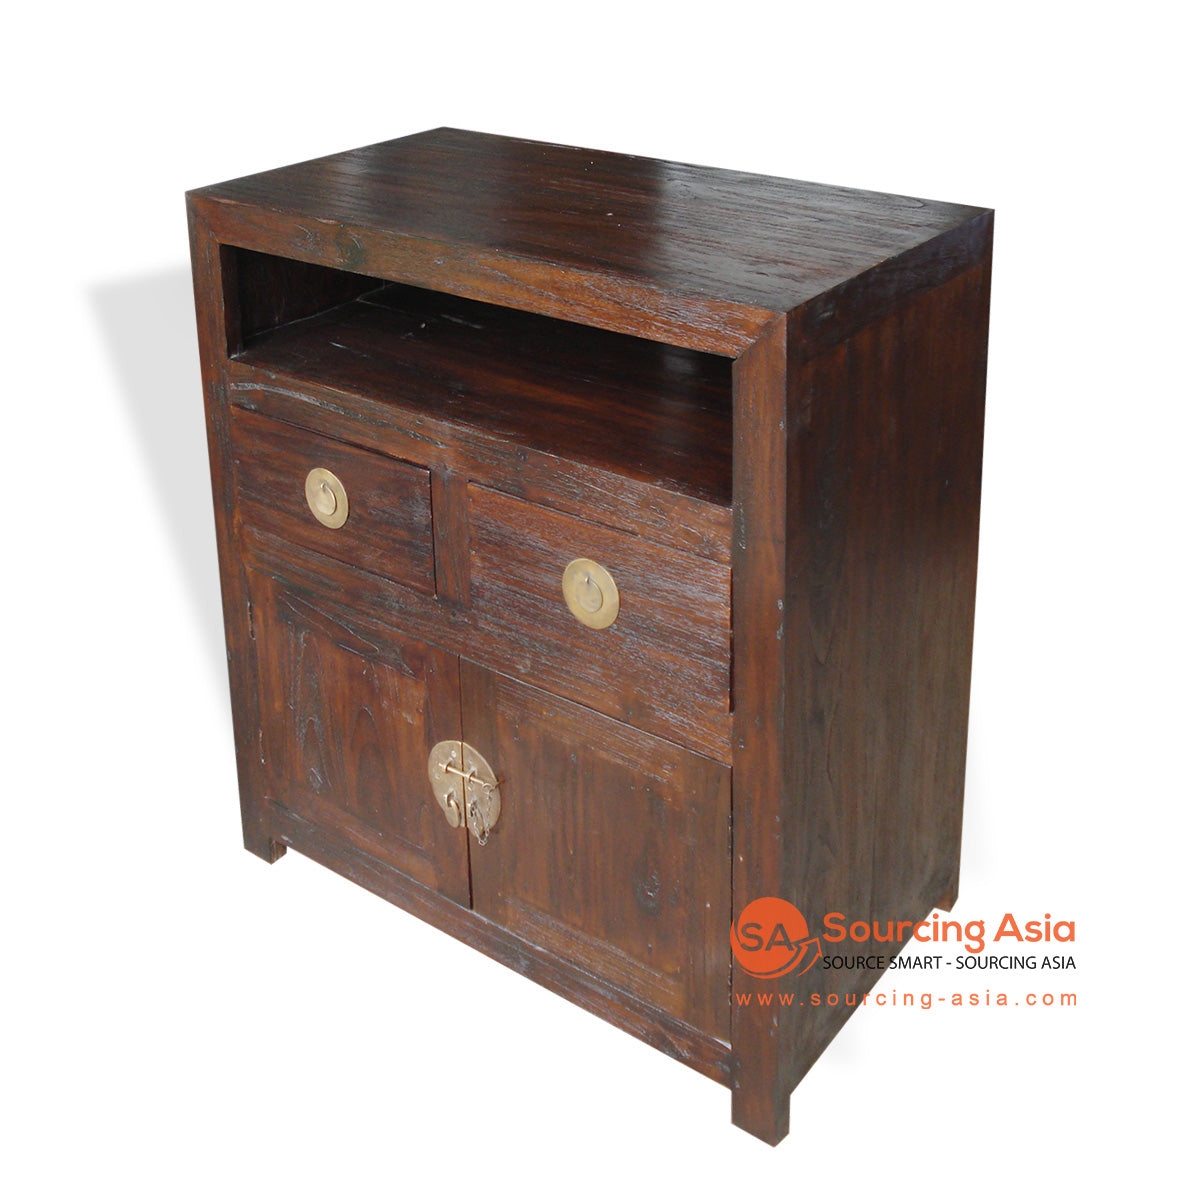 KYT-JGSP001 CHOCOLATE RECYCLED TEAK WOOD TWO DOORS AND DRAWERS CHINESE RUSTIC ENTERTAINMENT UNIT